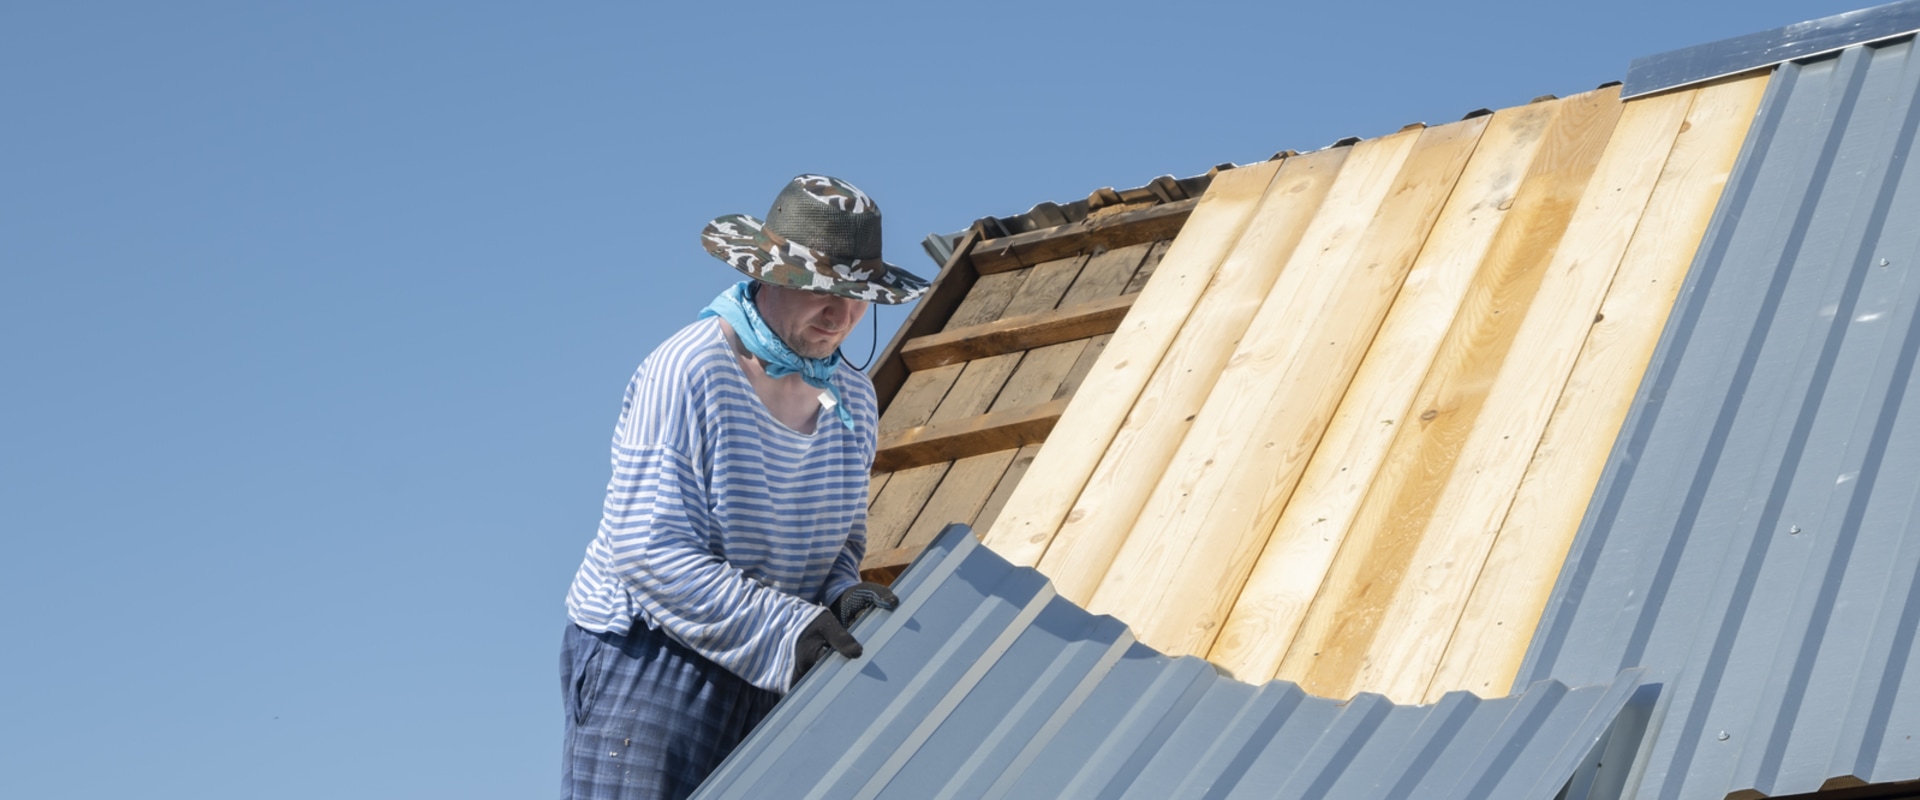 Choosing the Right Metal Roof for Your Home in Santa Rosa